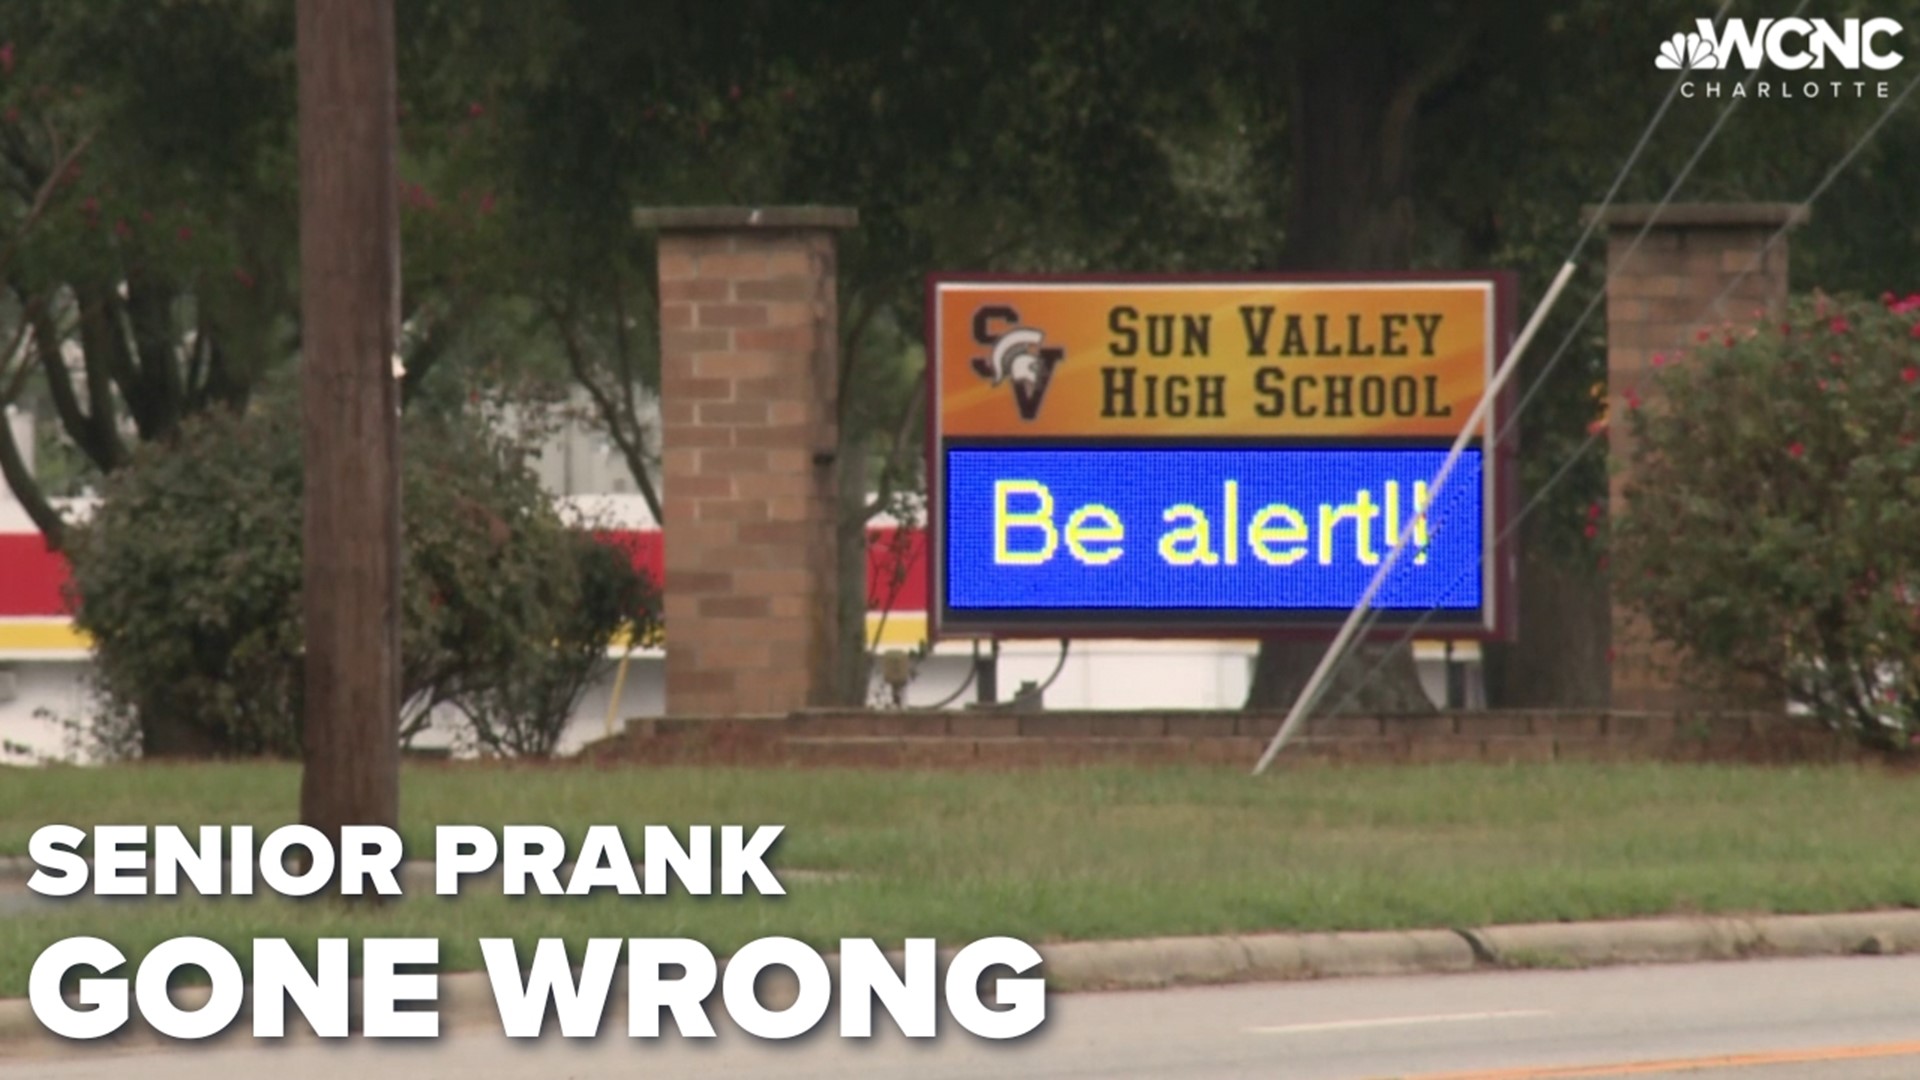 The Union County Sheriff's Office has made more arrests linked to the senior prank that went too far at Sun Valley High School.